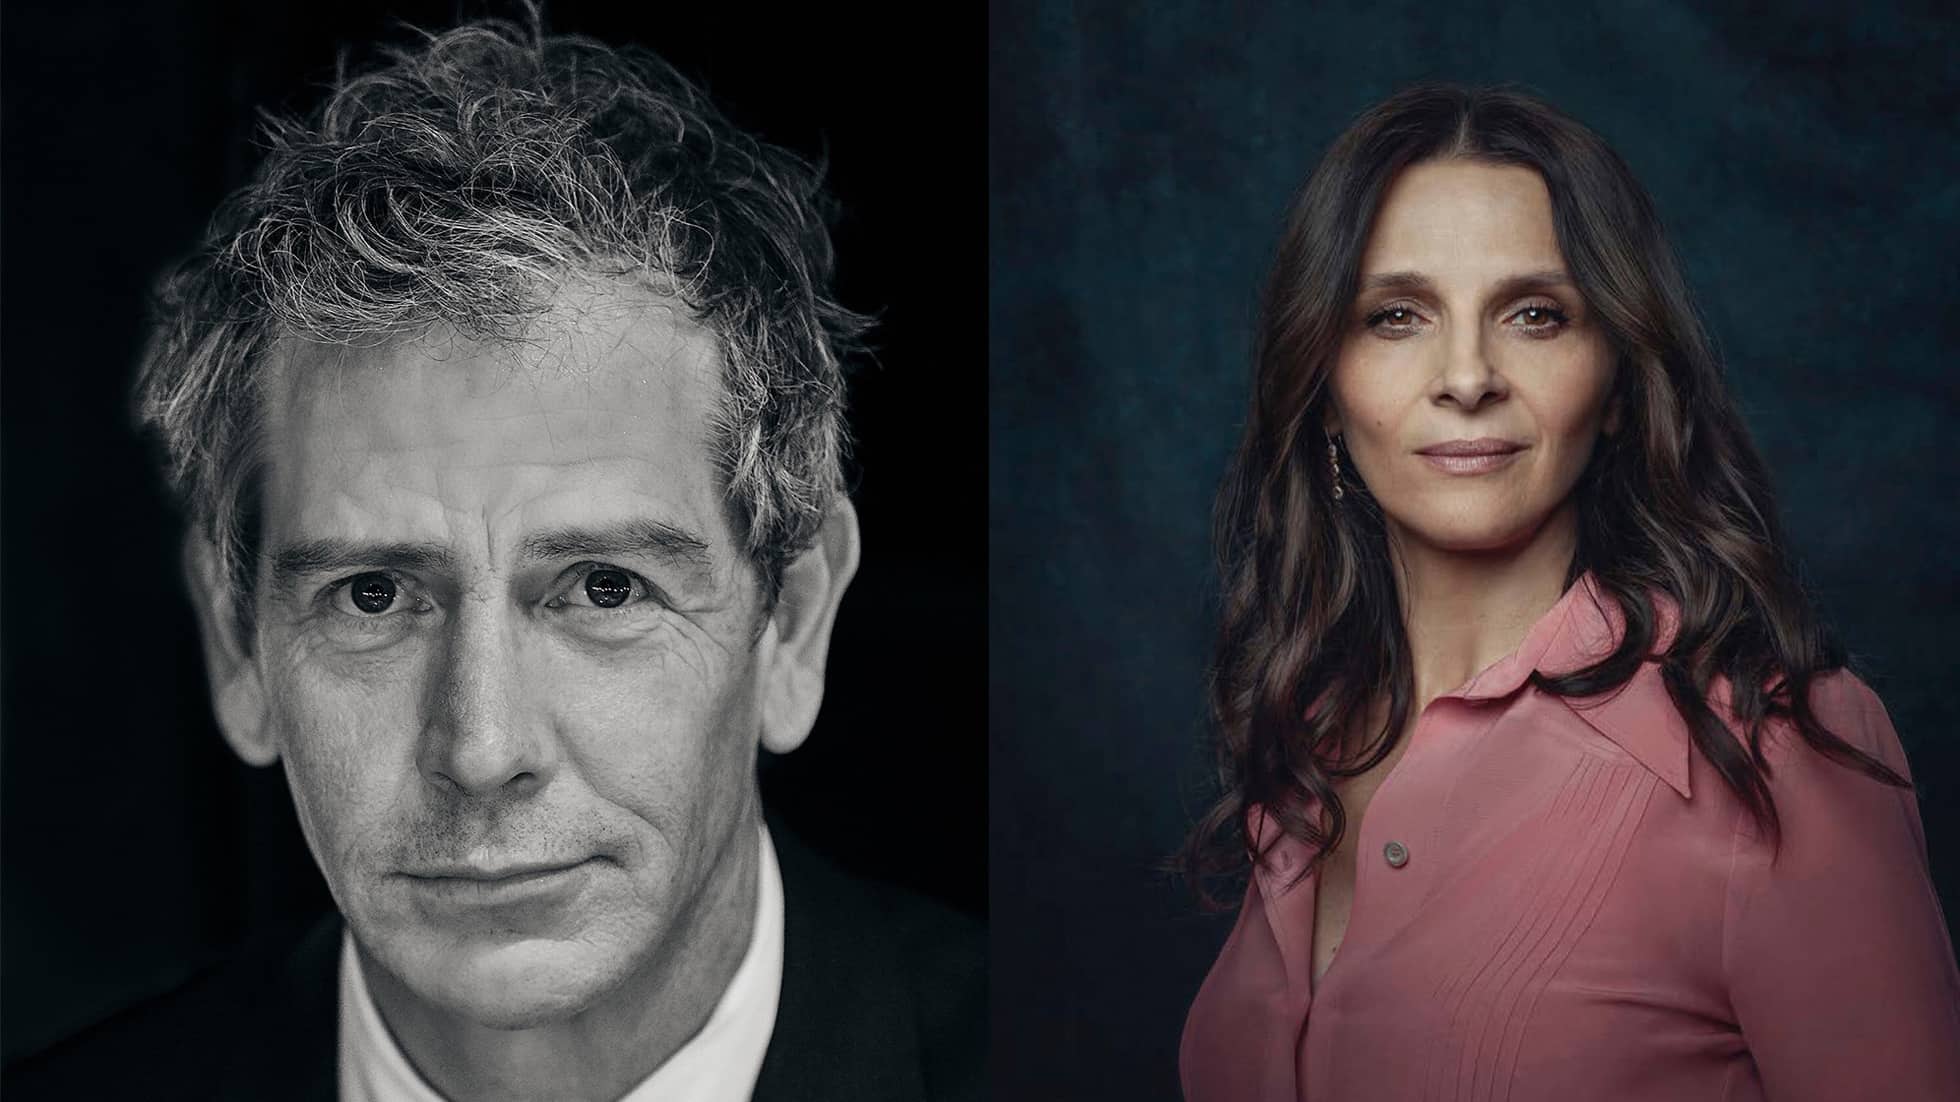 Promotional image for the Apple TV+ drama series “The New Look” with two headshots: actor Ben Mendelsohn (left), who portrays Christian Dior, and actress Juliette Binoche (right), who plays Coco Chanel 